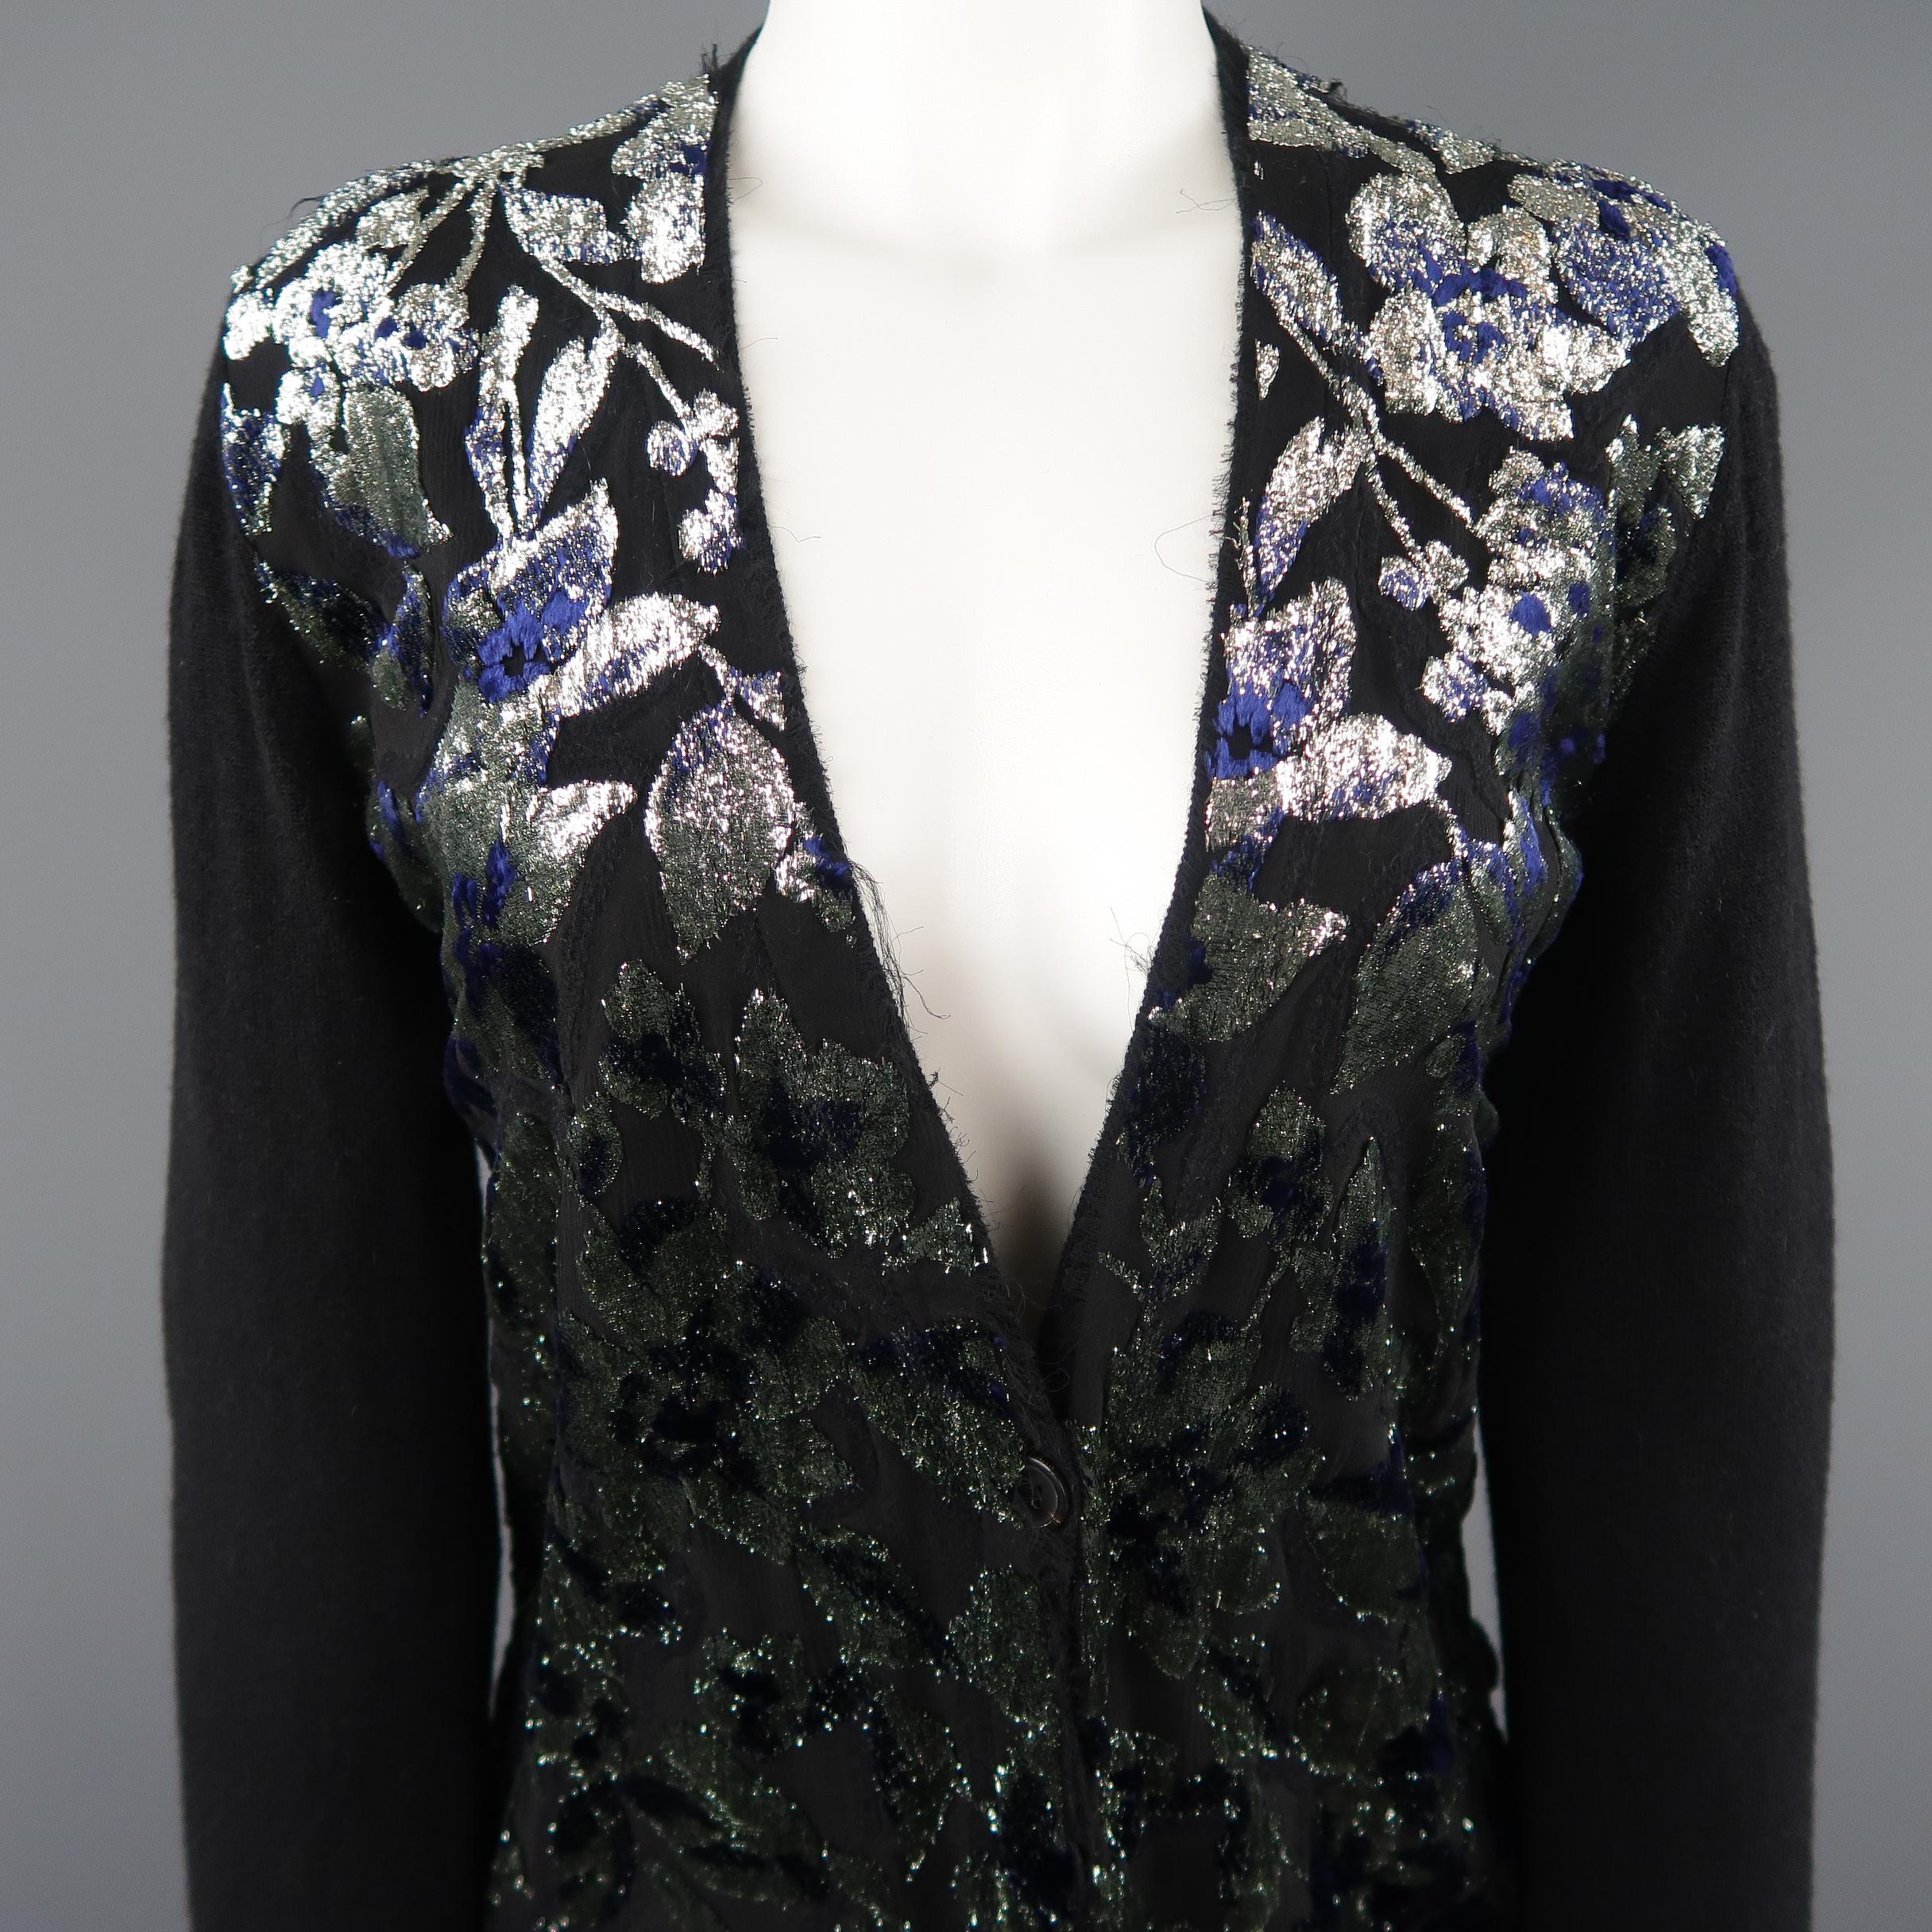 LANVIN cardigan comes in a black knit with a V neck, extended length, and metallic floral burnout jacquard chiffon frontal panels. Made in Italy. Retail price $1,295.00. 
 
Good Pre-Owned Condition.
Marked: (no size)
 
Measurements:
 
Shoulder: 15